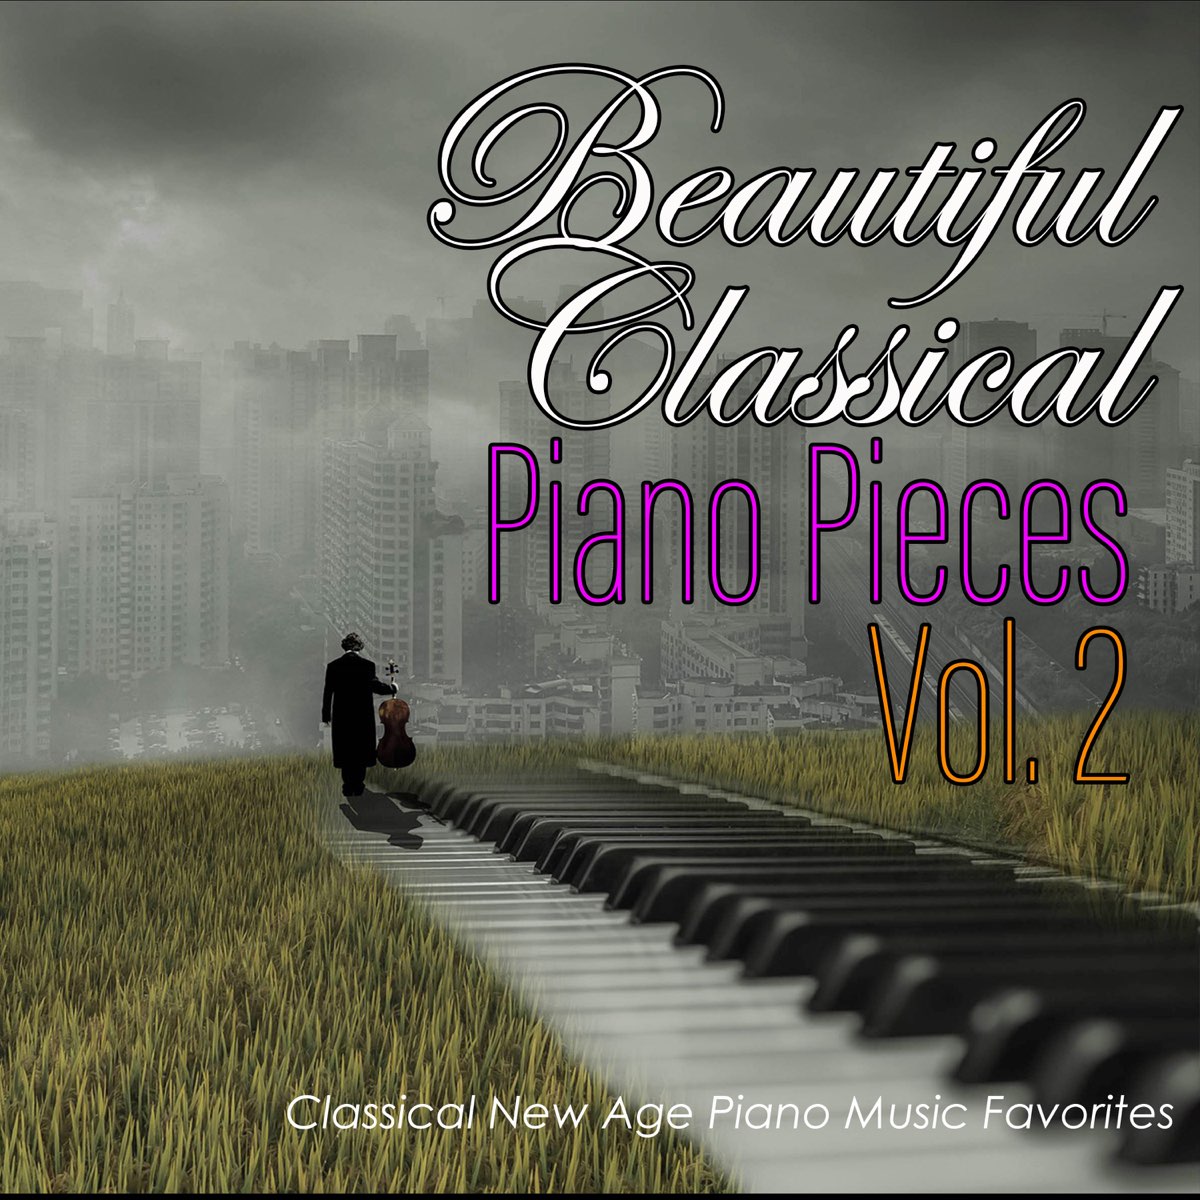 Beautiful Classical Piano Pieces Vol. 2: Classical New Age Piano Music  Favorites by Renato Ferrari, Classical Music DEA Channel & Relaxing Classical  Music Academy on Apple Music